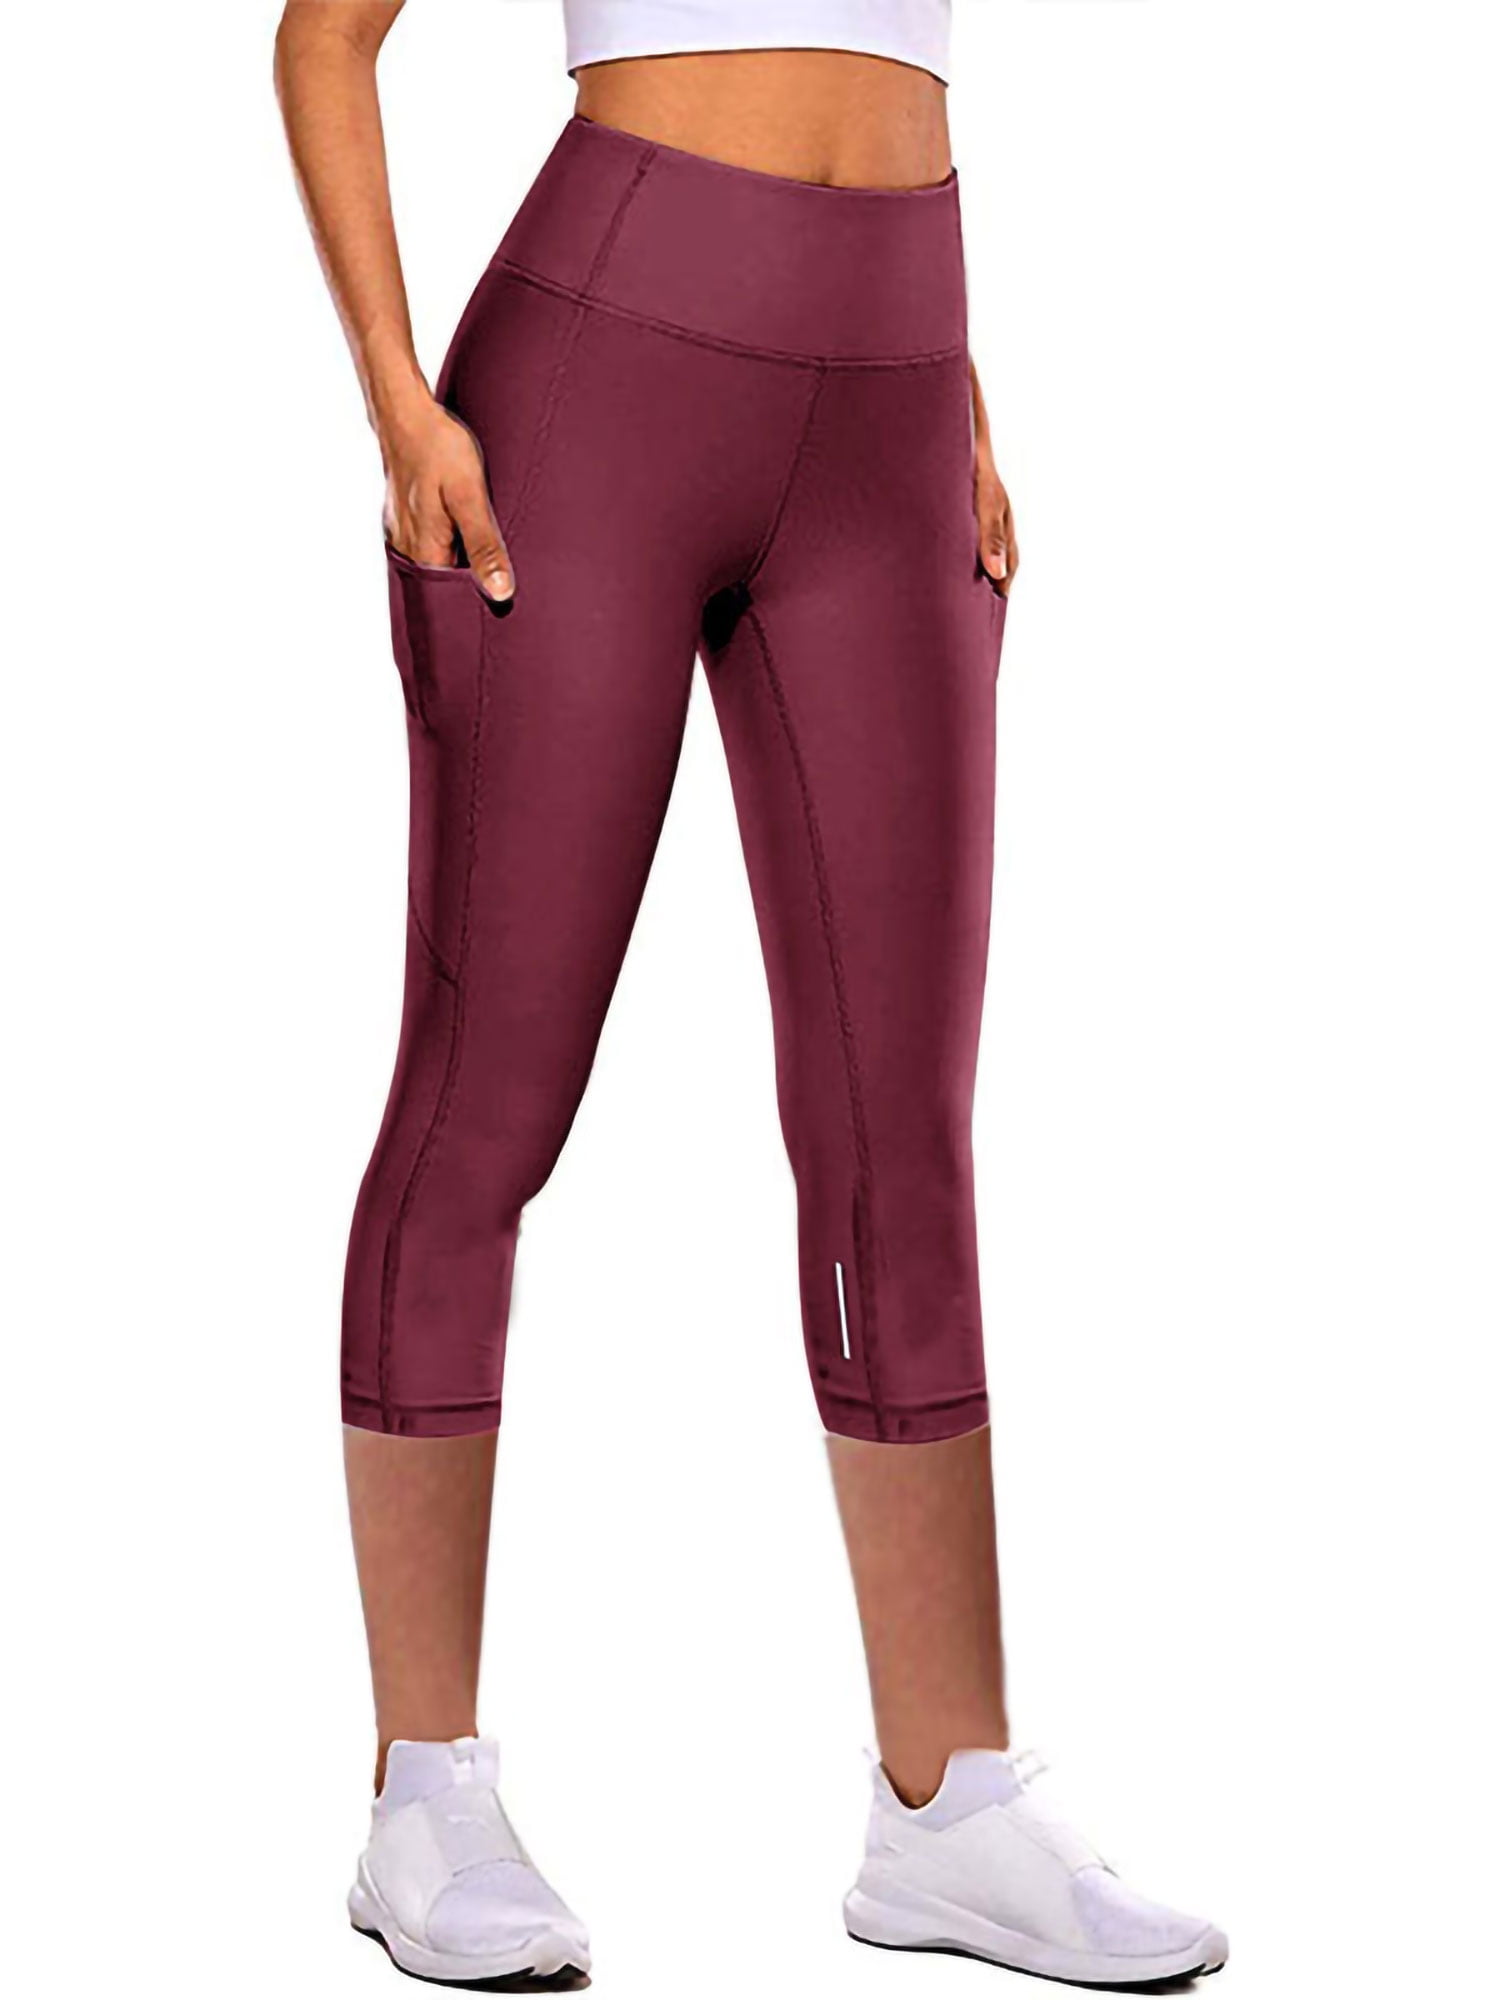 Real Essentials 4 Pack: Women's Capri Leggings with Pockets Casual Yoga Workout  Exercise Pants (Available in Plus Size) 